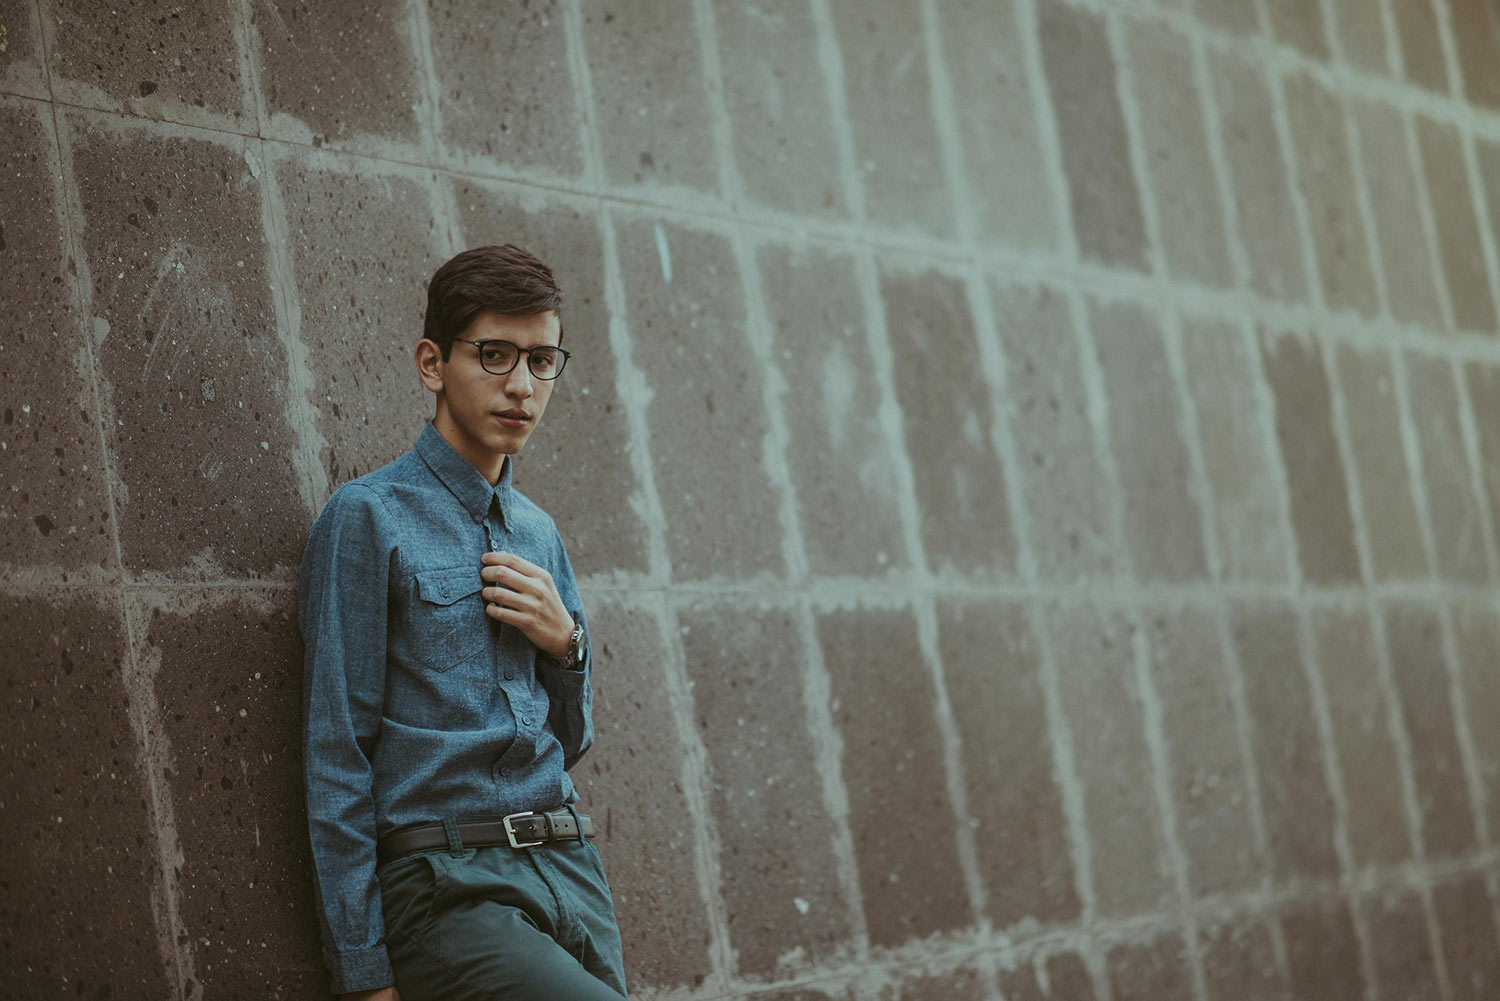 A teen boy in a blue button-up shirt leans against a concrete wall and stares warily at the camera.